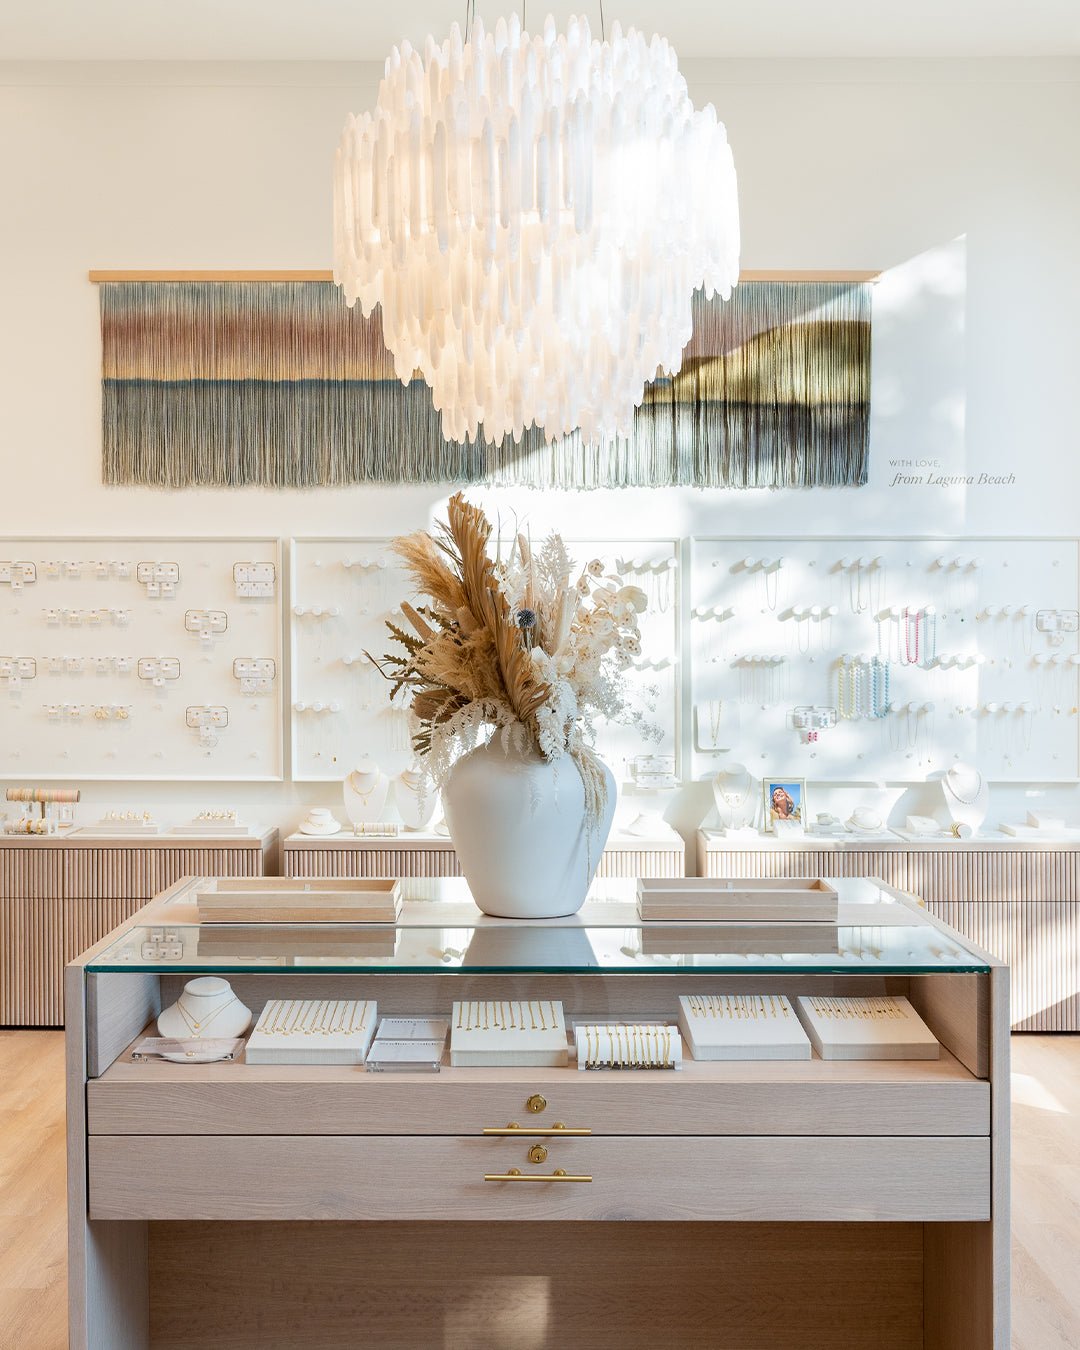 gorjana store interior with jewelry case and white chandelier 